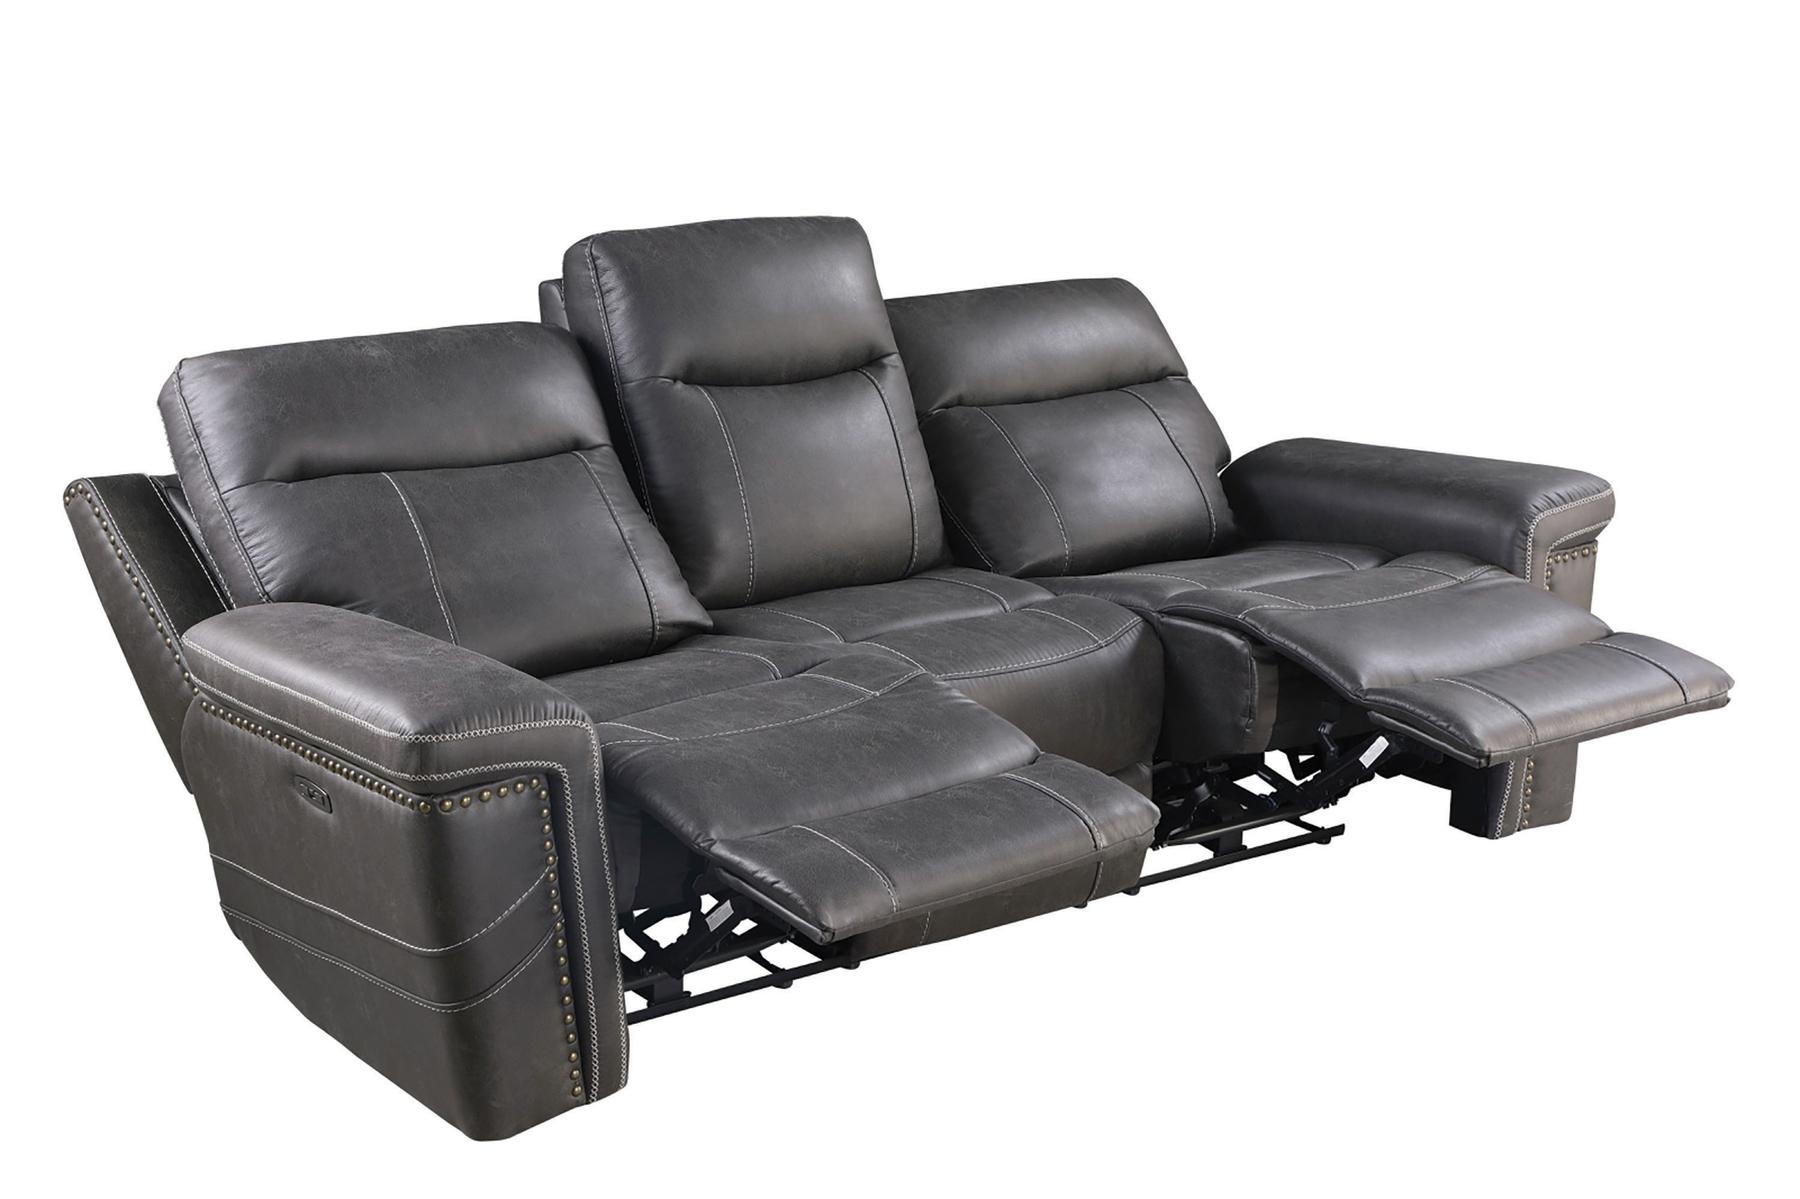 

    
Coaster 603514PP Wixom Power Reclining Sofa Charcoal 603514PP
